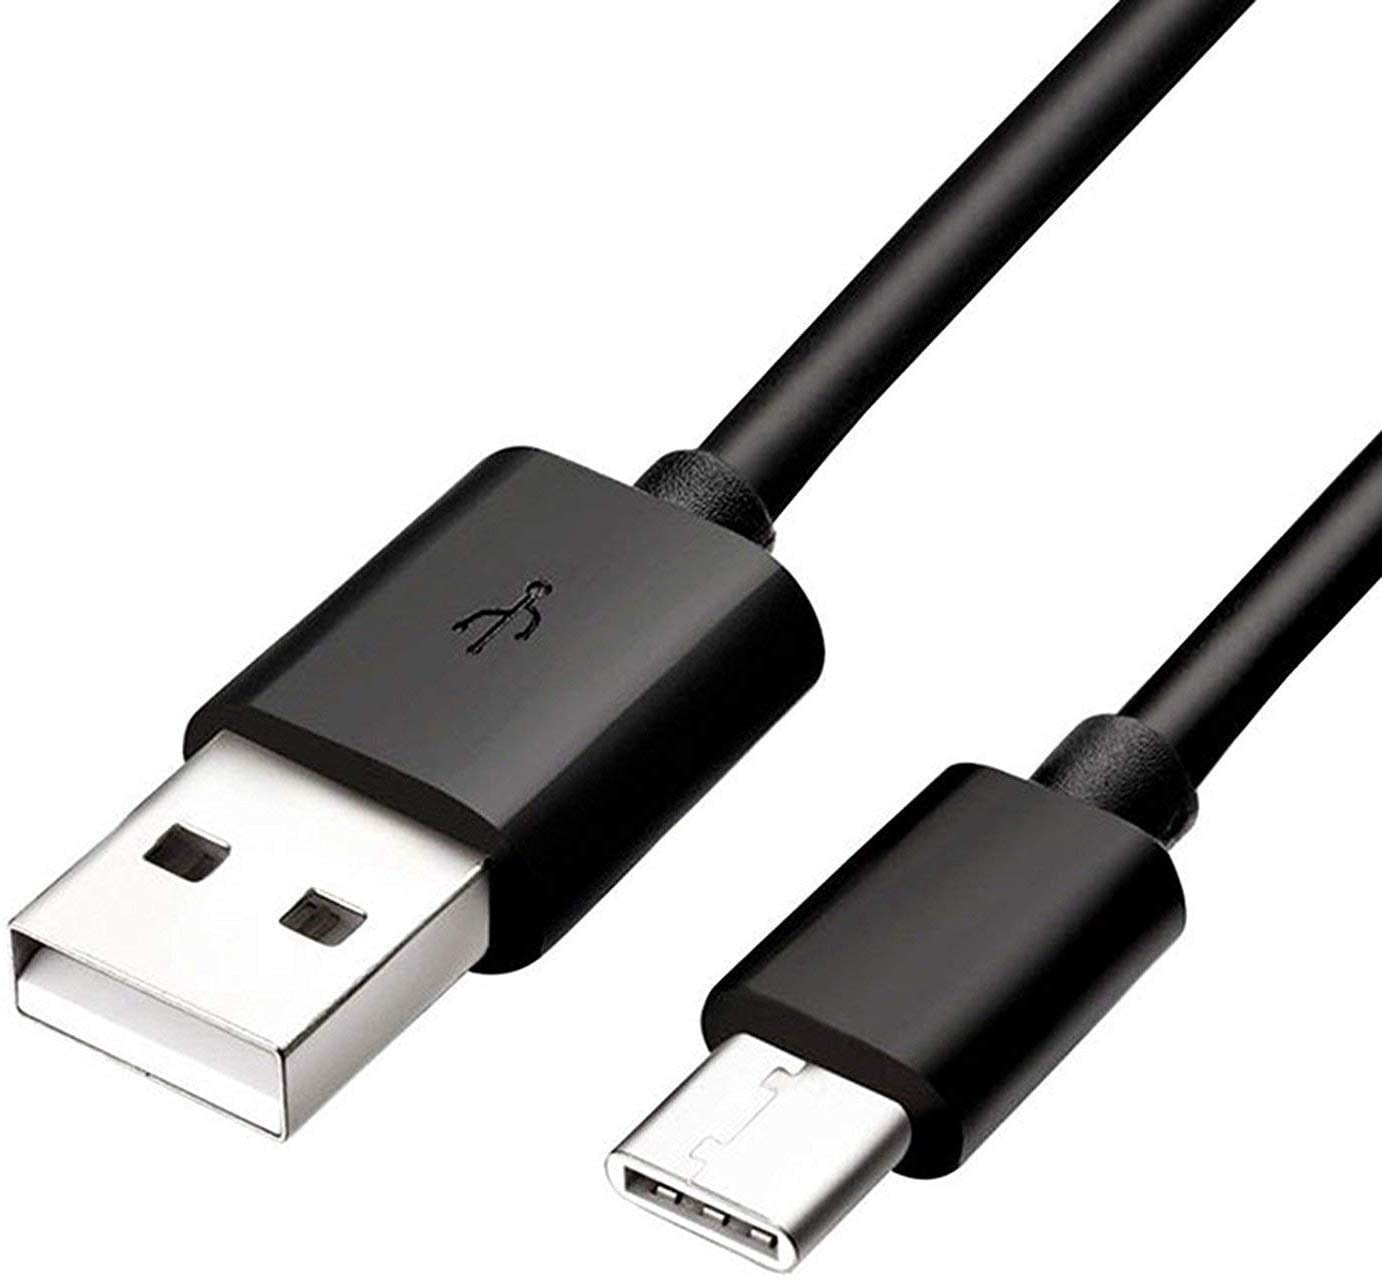 Samsung Galaxy A20e USB to Type C Charging Cable Lead Black - 2M - SmartPhoneGadgetUK